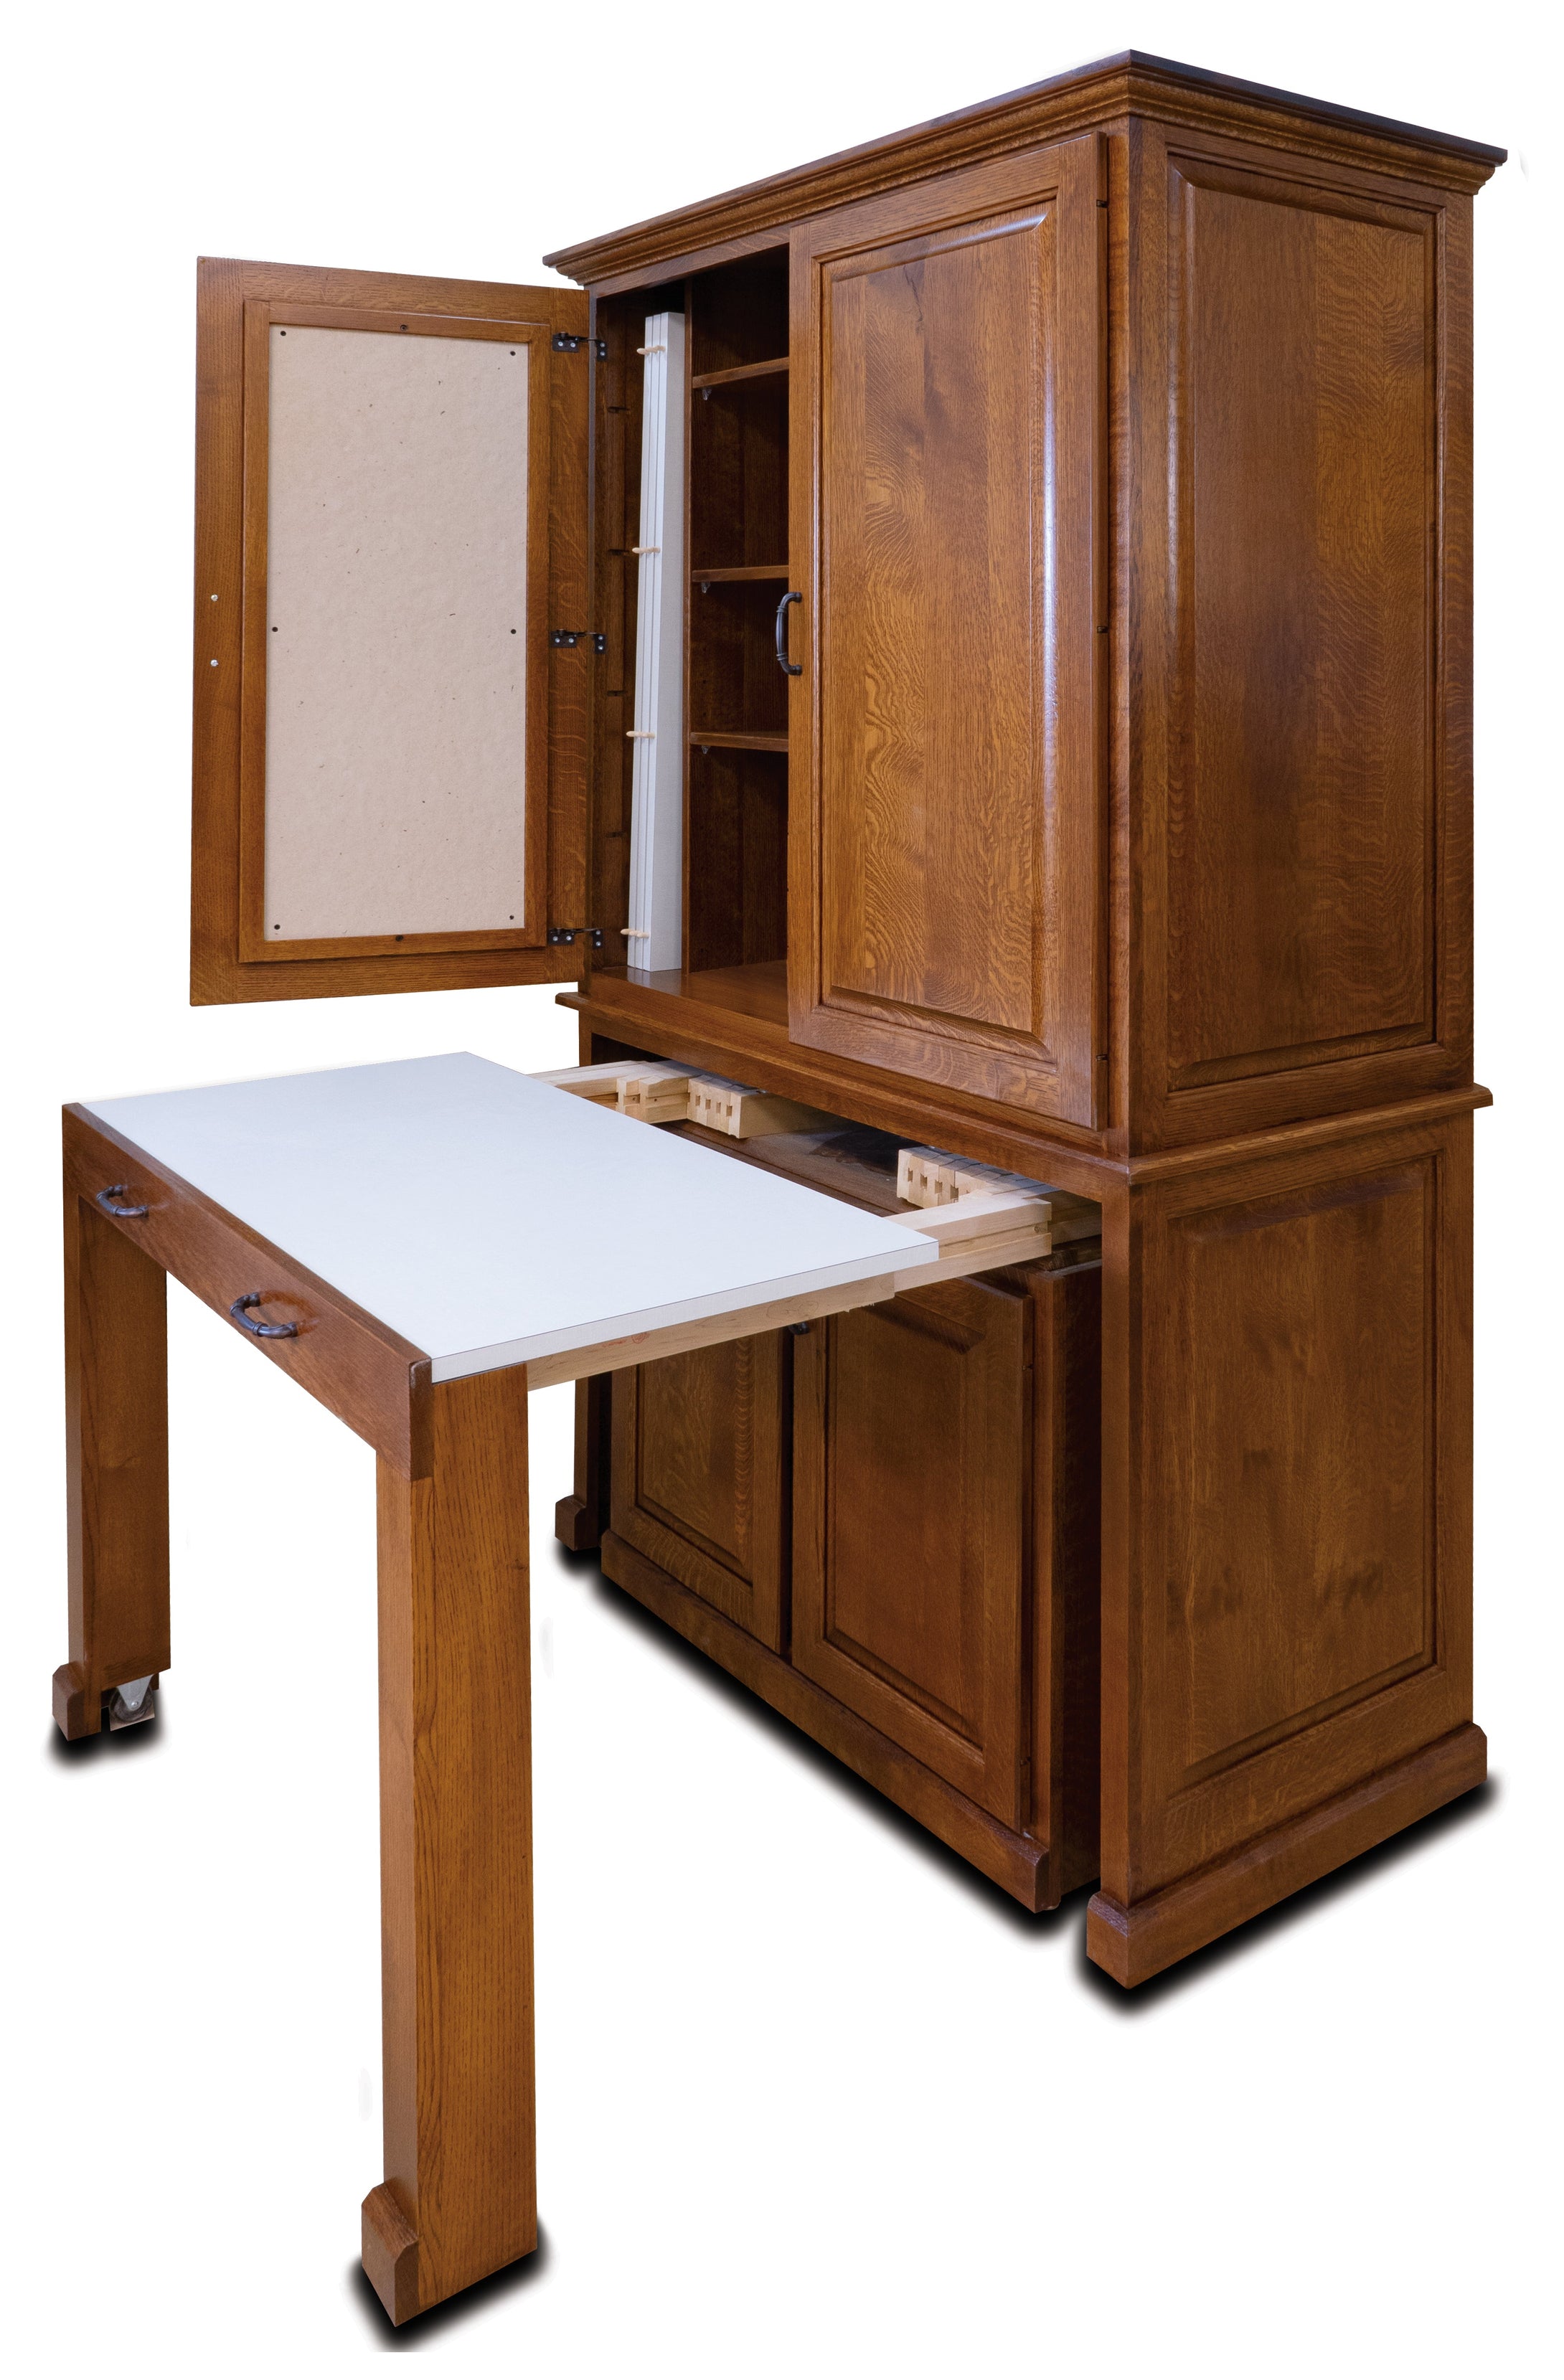 Sewing armoire idea for fold out table - perfect for my crafts and  knitting, too!!